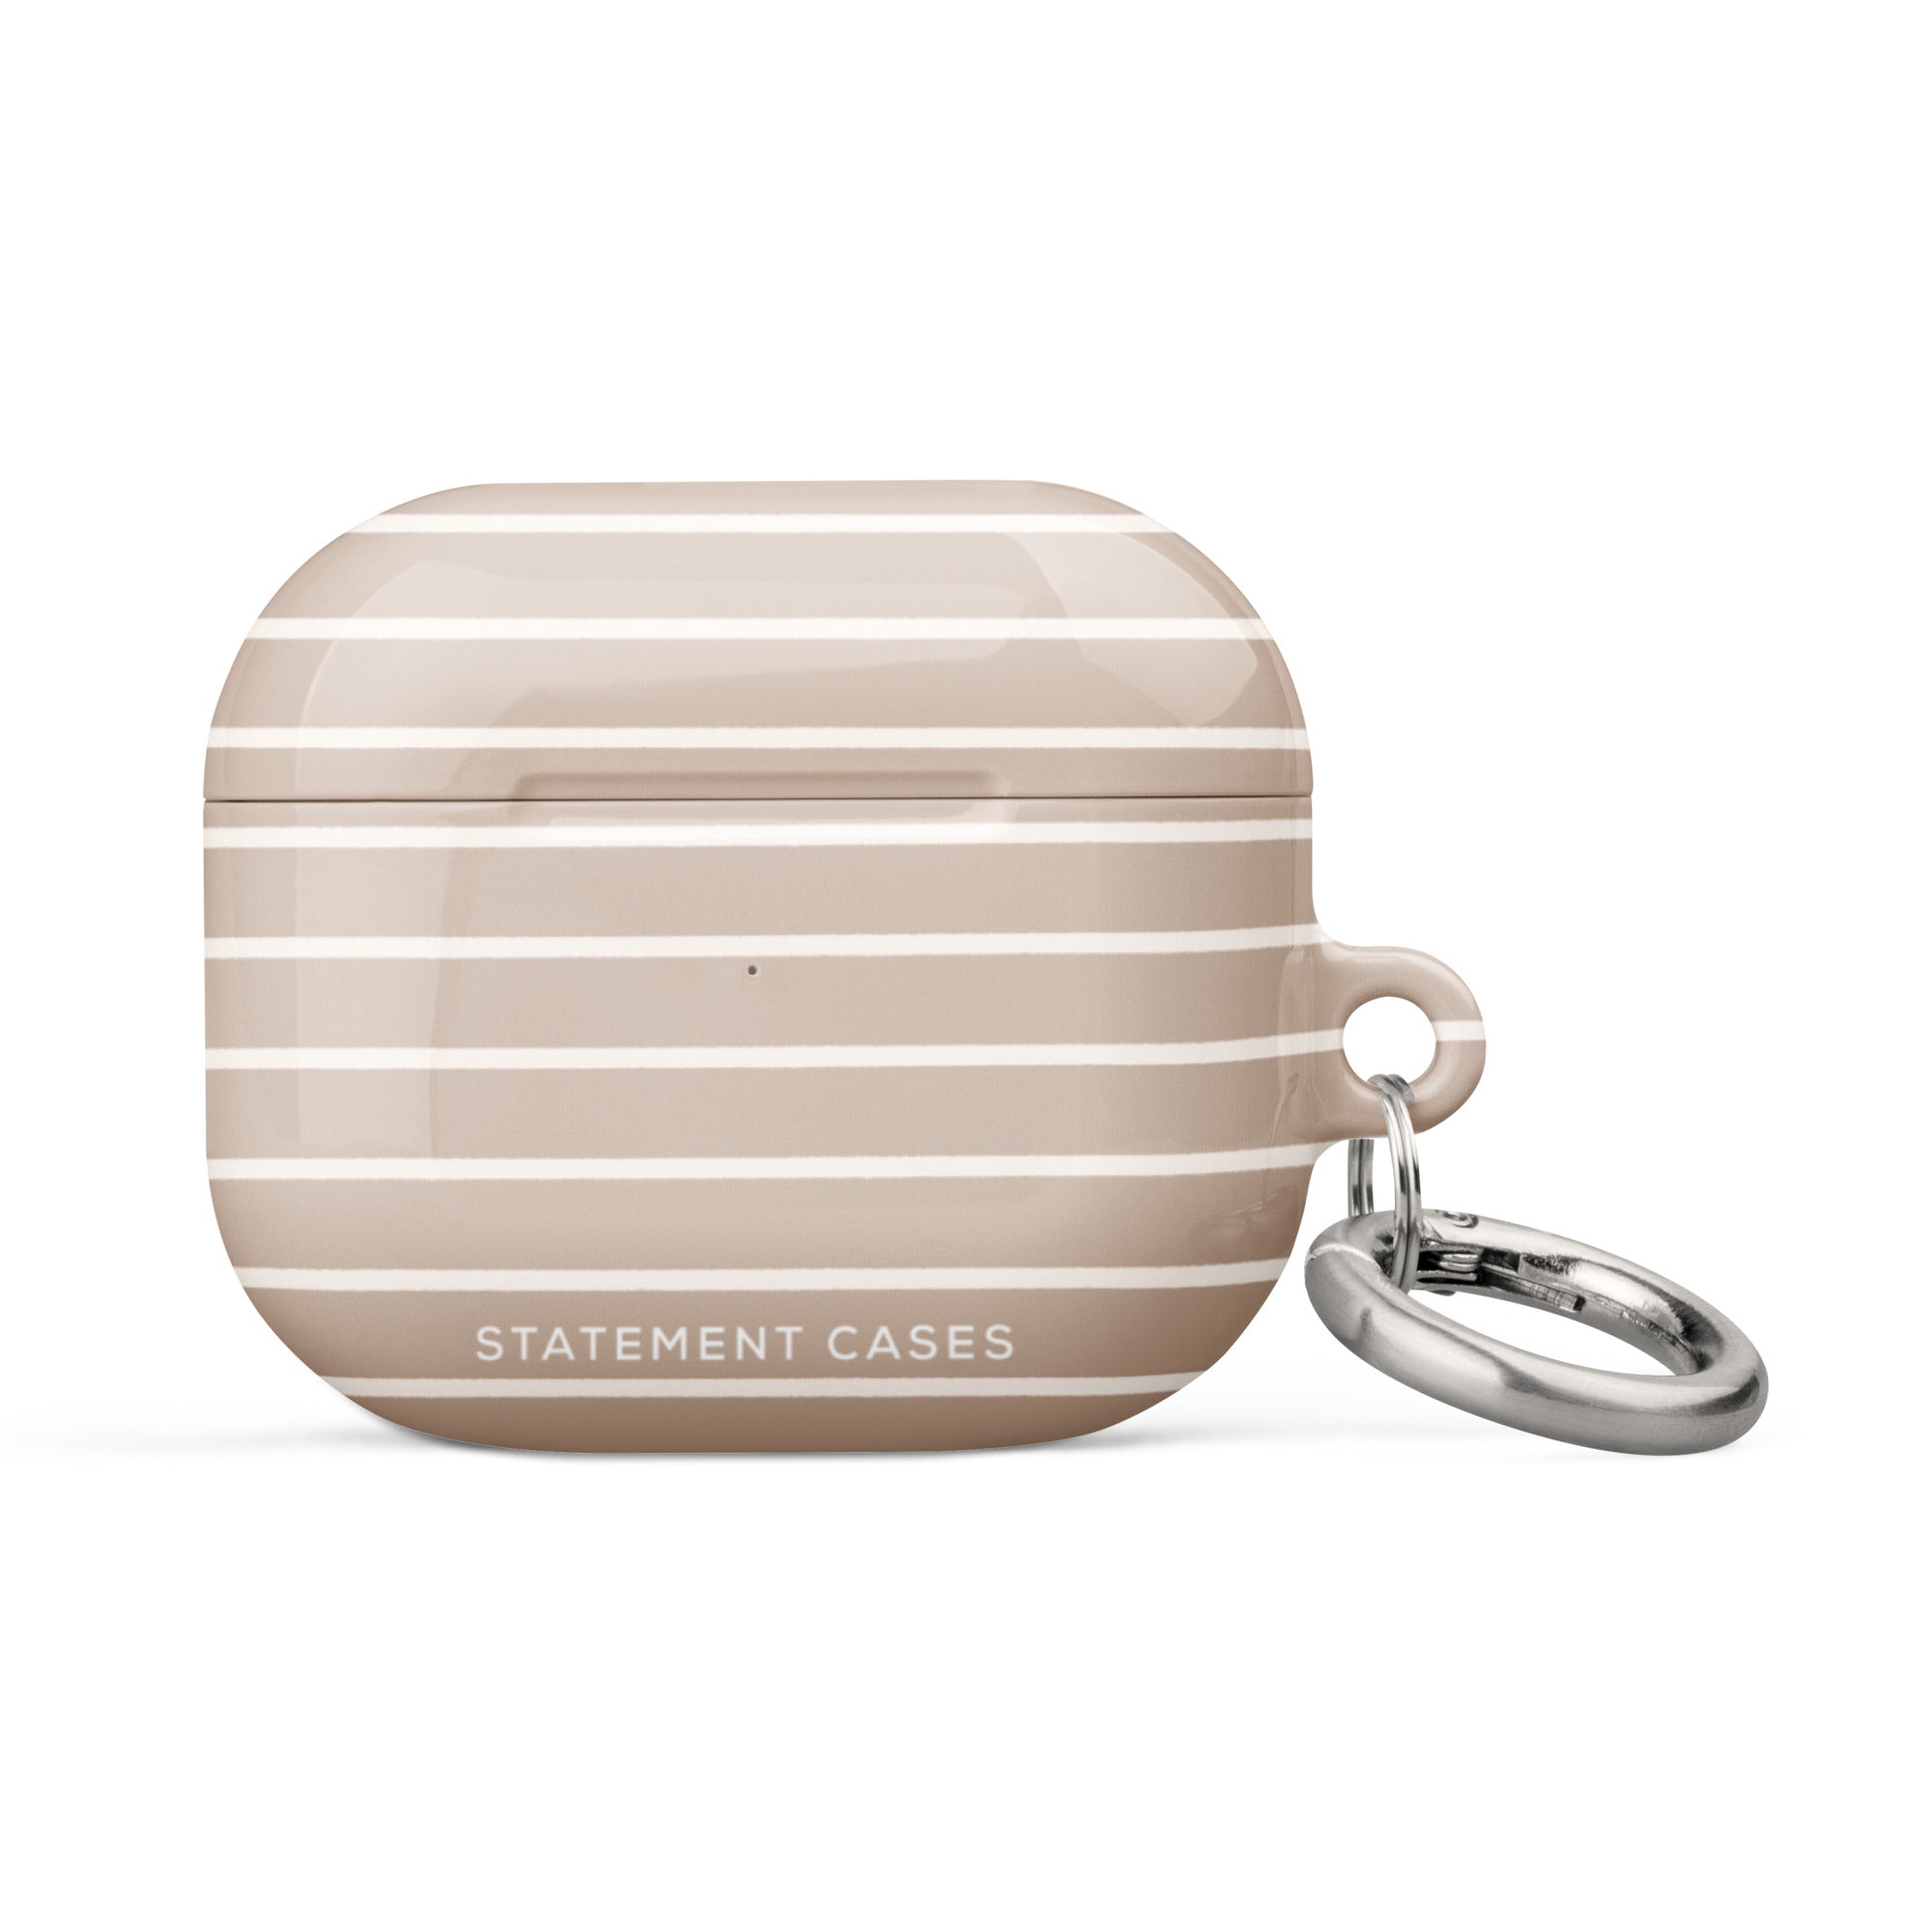 A beige, impact-absorbing Au Naturale for AirPods Gen 3 case from Statement Cases with horizontal white stripes and a metal carabiner attached to the right side. The text "STATEMENT CASES" is printed on the bottom front of the case.